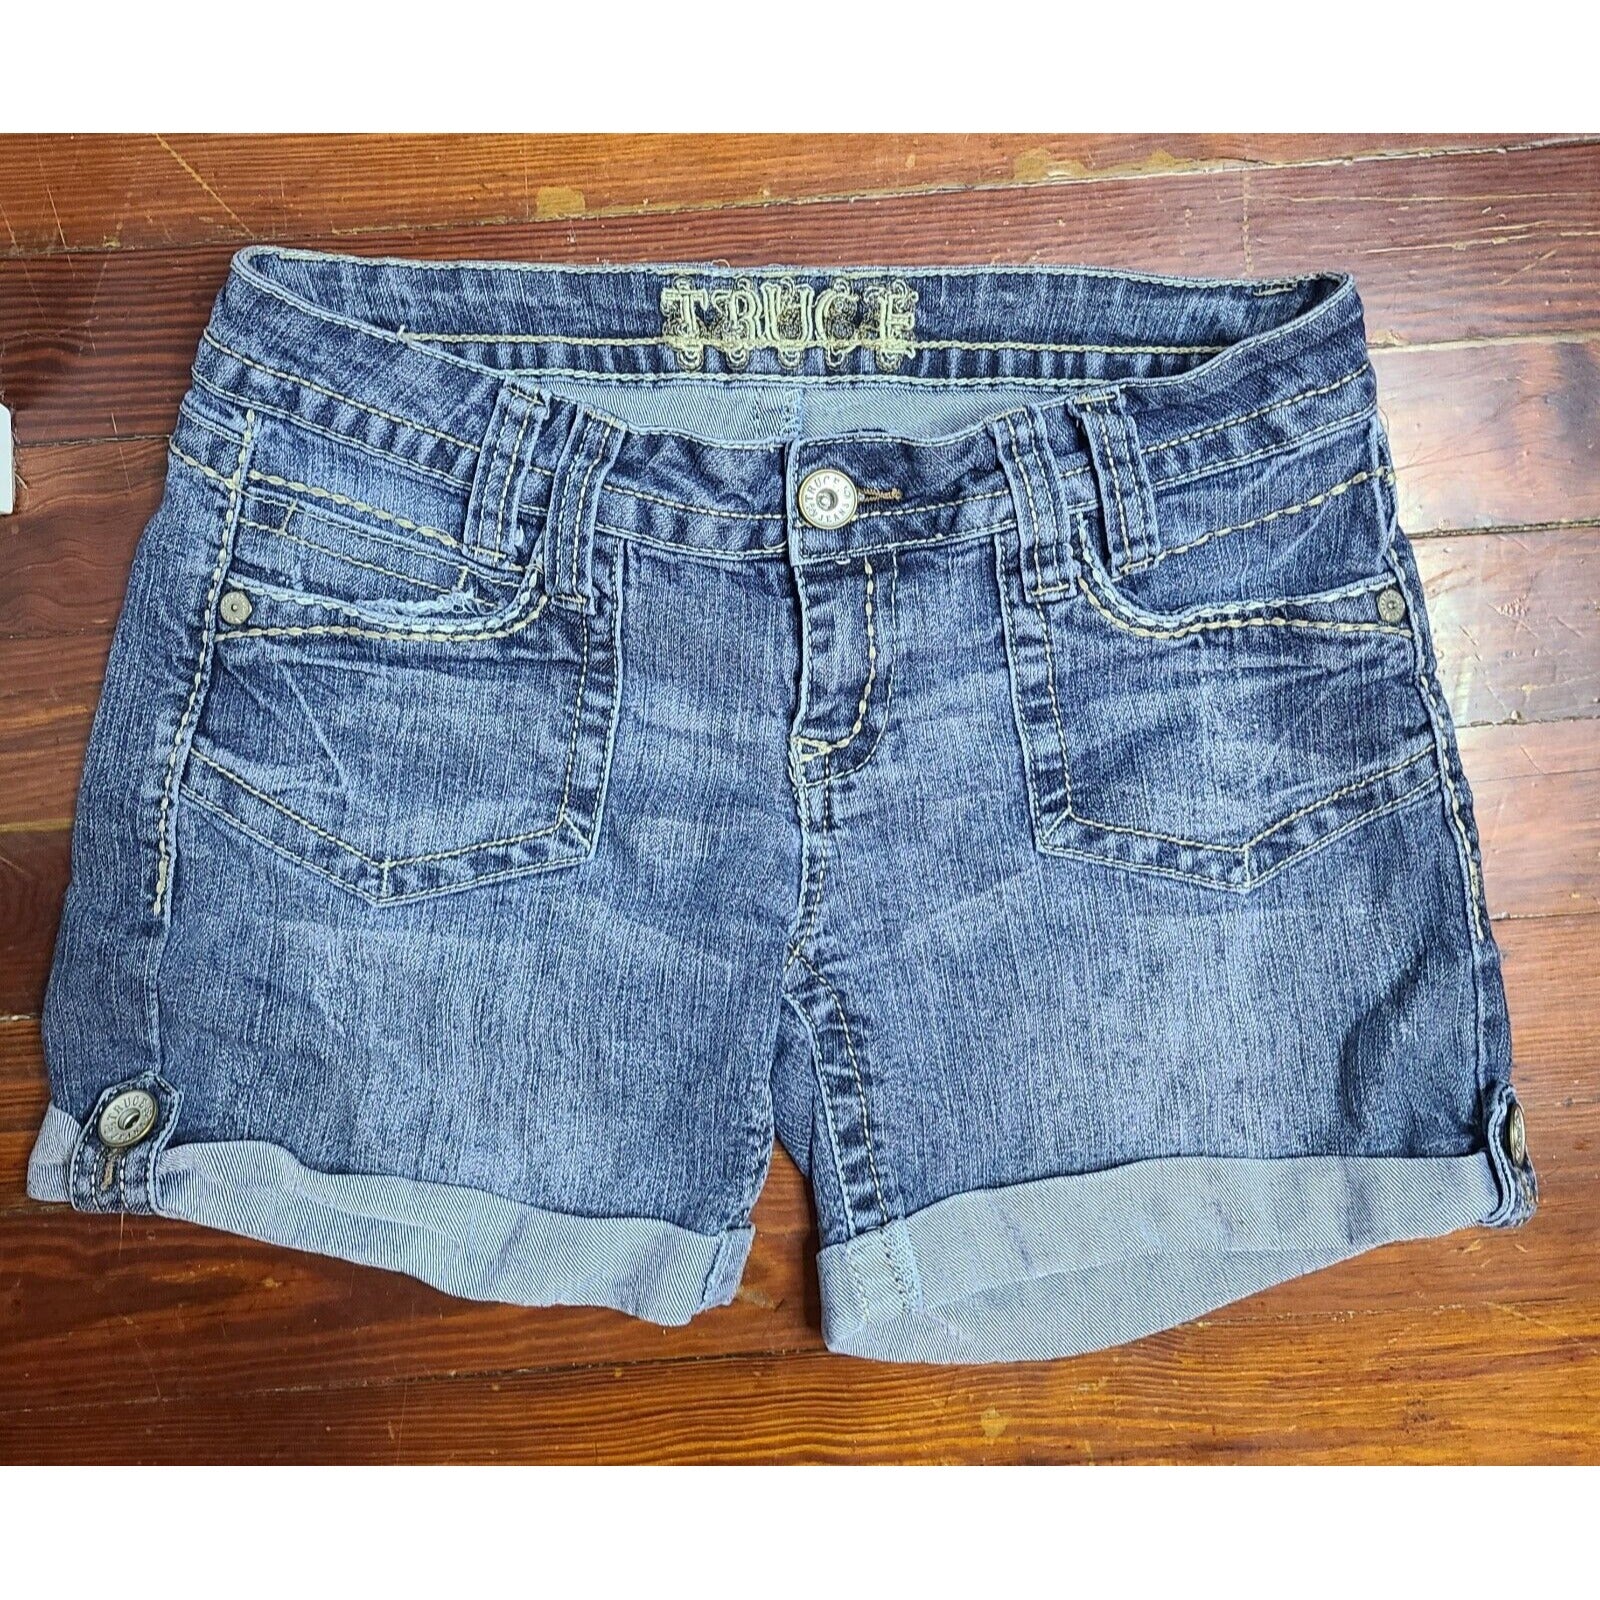 Truce Size 8 Blue Denim Jean Shorts Rolled Up Bottom Hem With Buttons